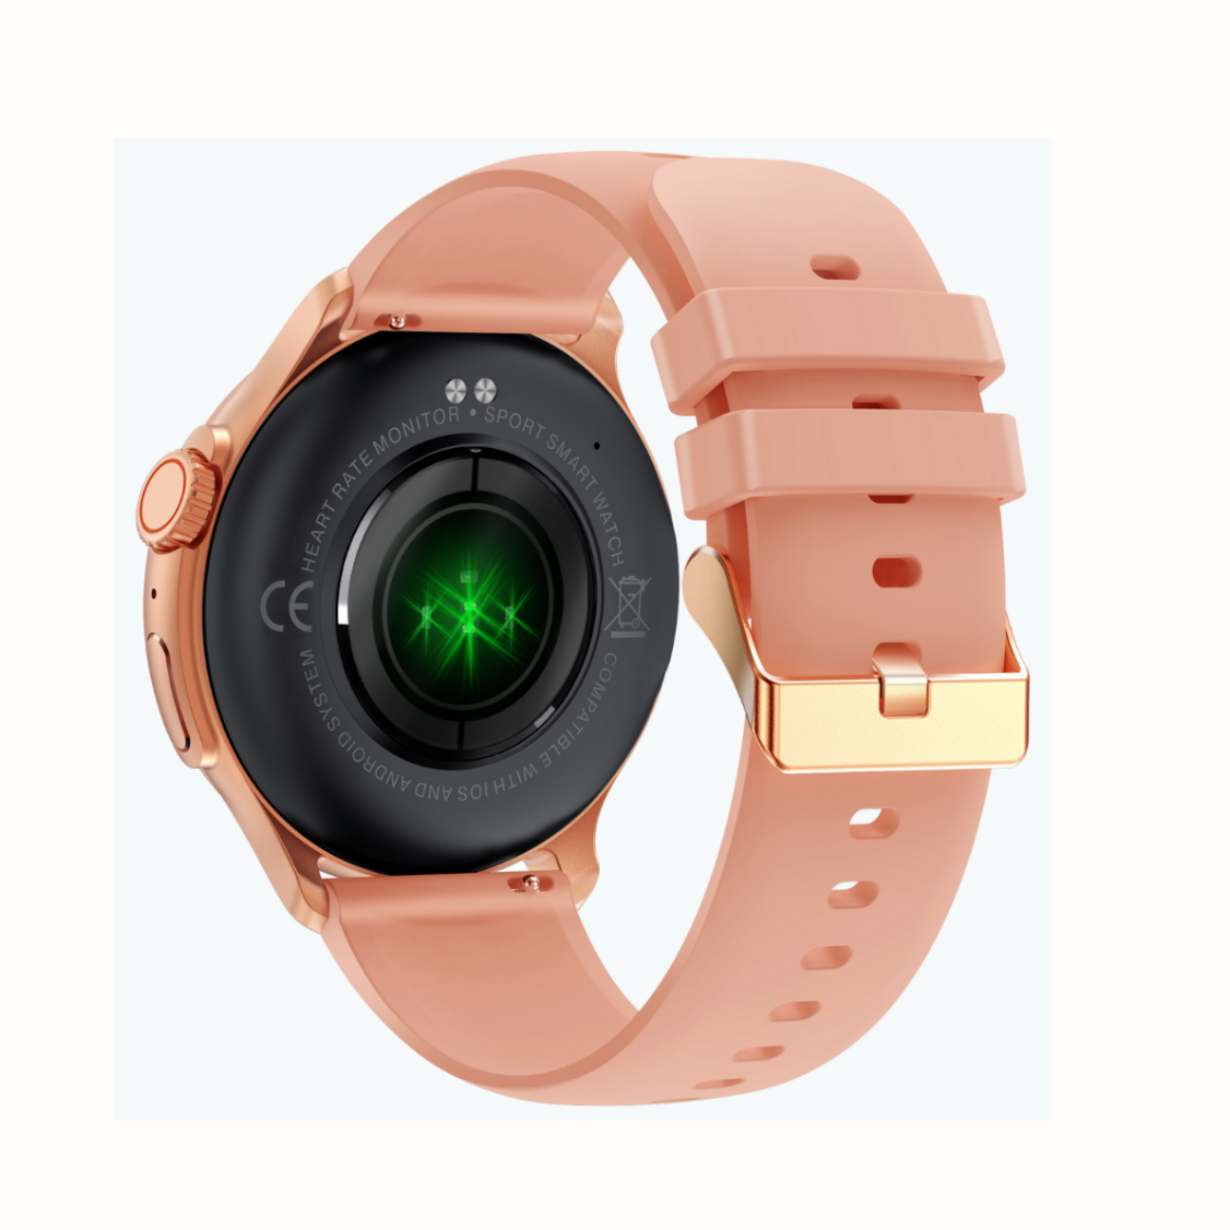 K58 Unisex Smartwatch, AMOLED Display, Setup with Android device, Setup with Apple Device, Water resistance - IP68, Best Smart Watch, 2023, Track Activity,Track WOmens Health, Pedometer, Calorie Monitor, Sleep Tracking, Heart Rate Monitor, Blood Oxygen Monitor- Spo2, Multisport Mode, Color- Rose Gold